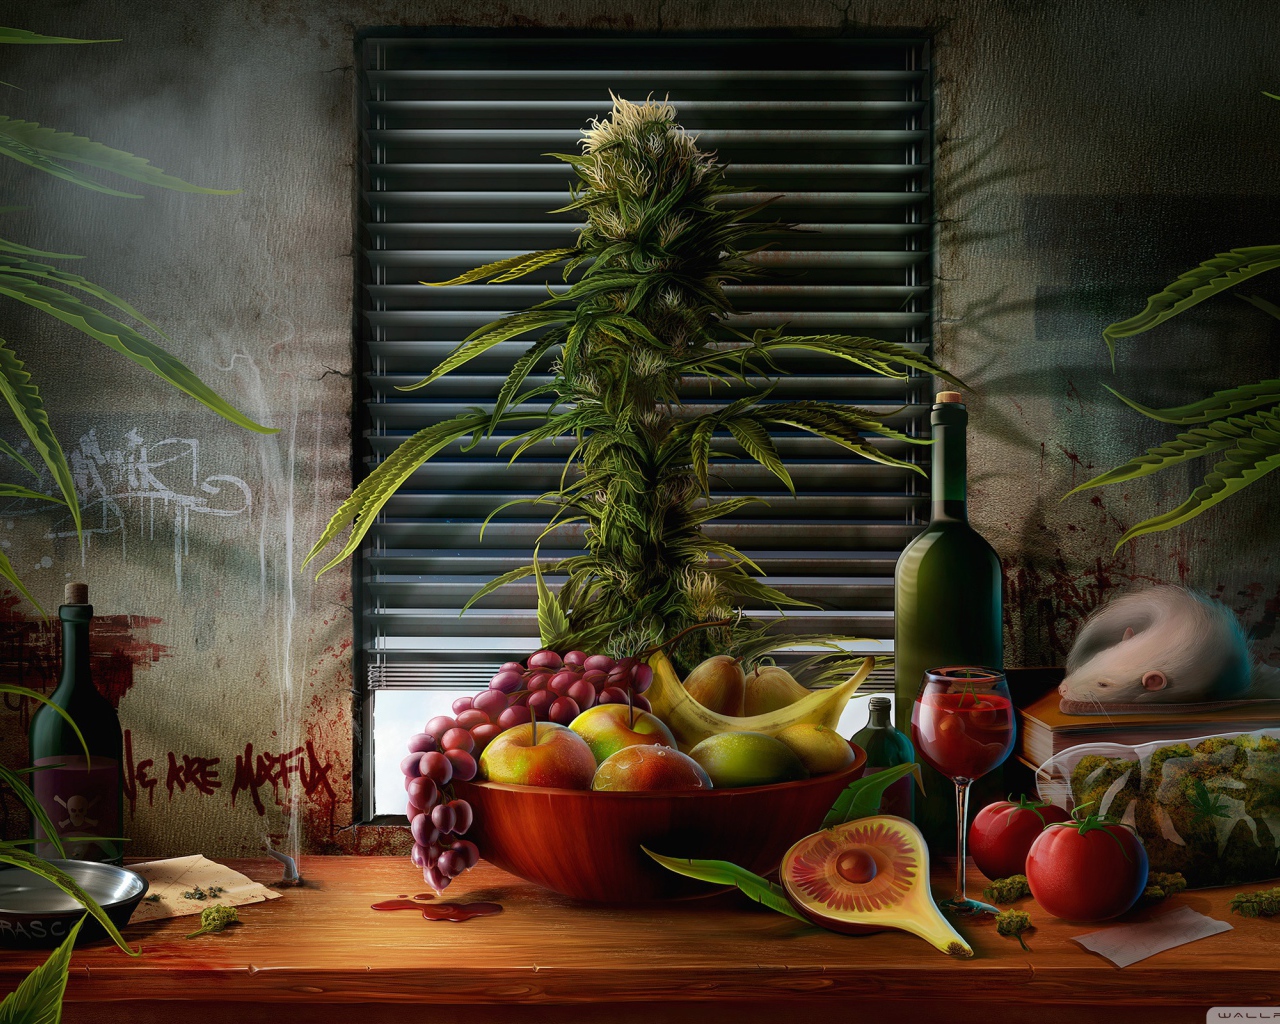 Fruits and cannabis